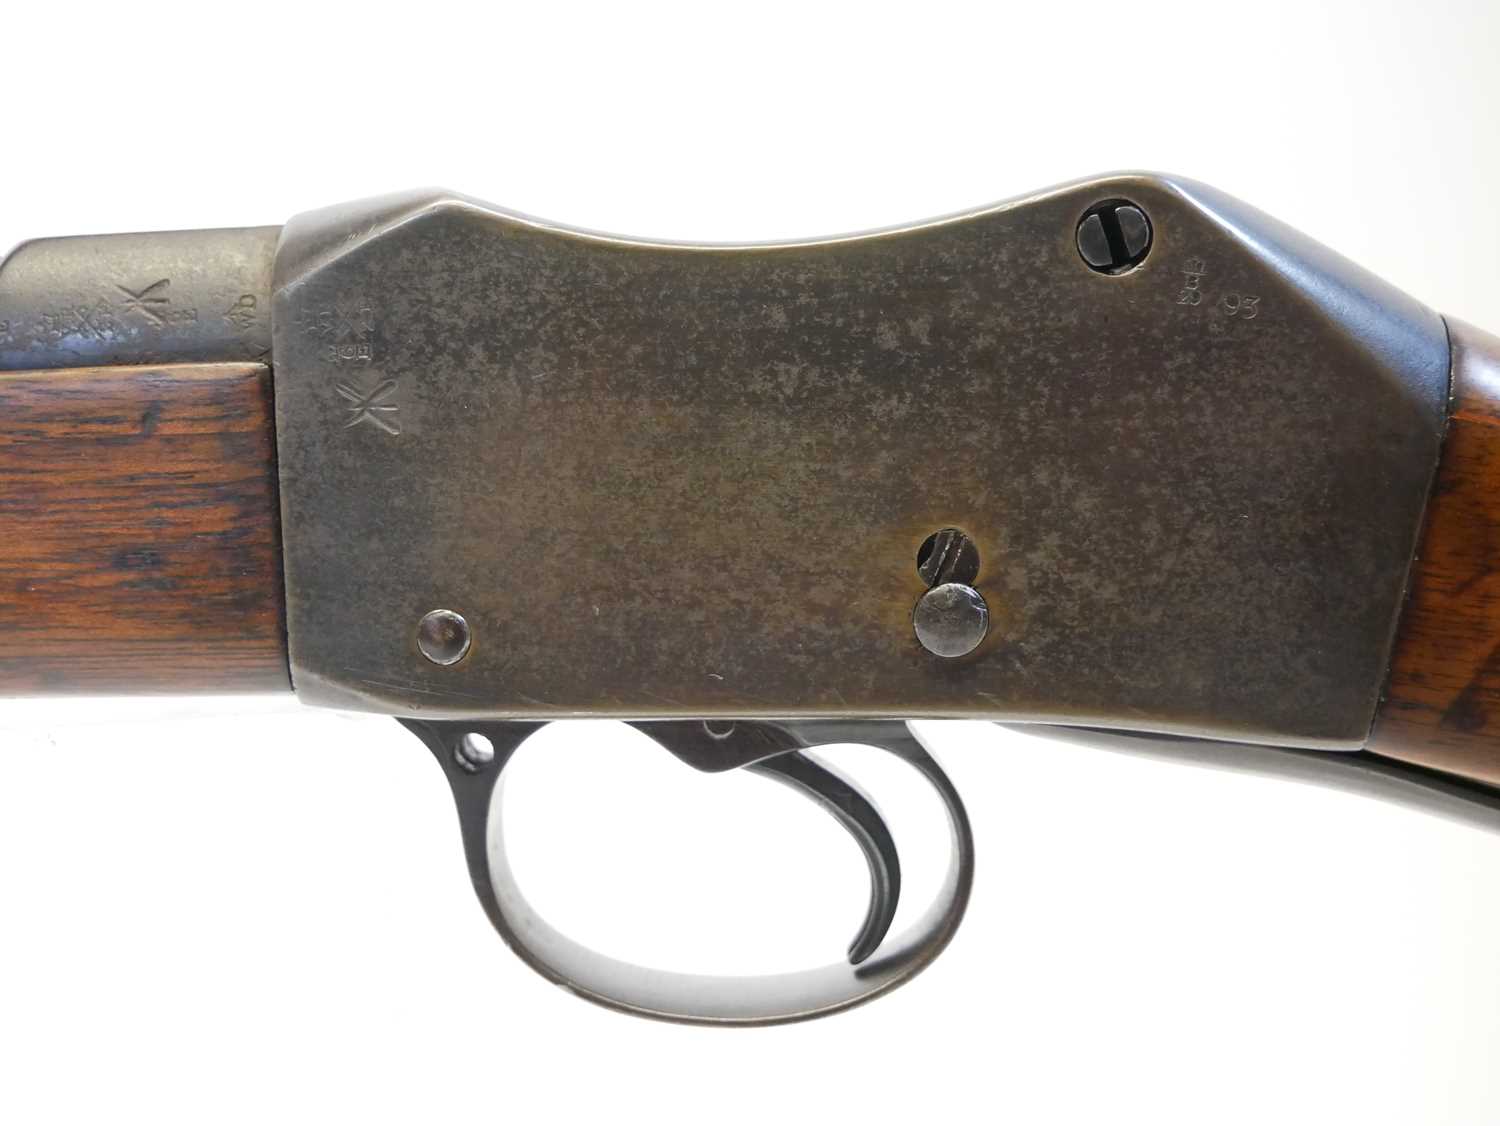 Enfield Martini Henry 577/450 Cavalry Carbine IC1, with 20.5 inch barrel (saw cut to the breech) - Image 15 of 18